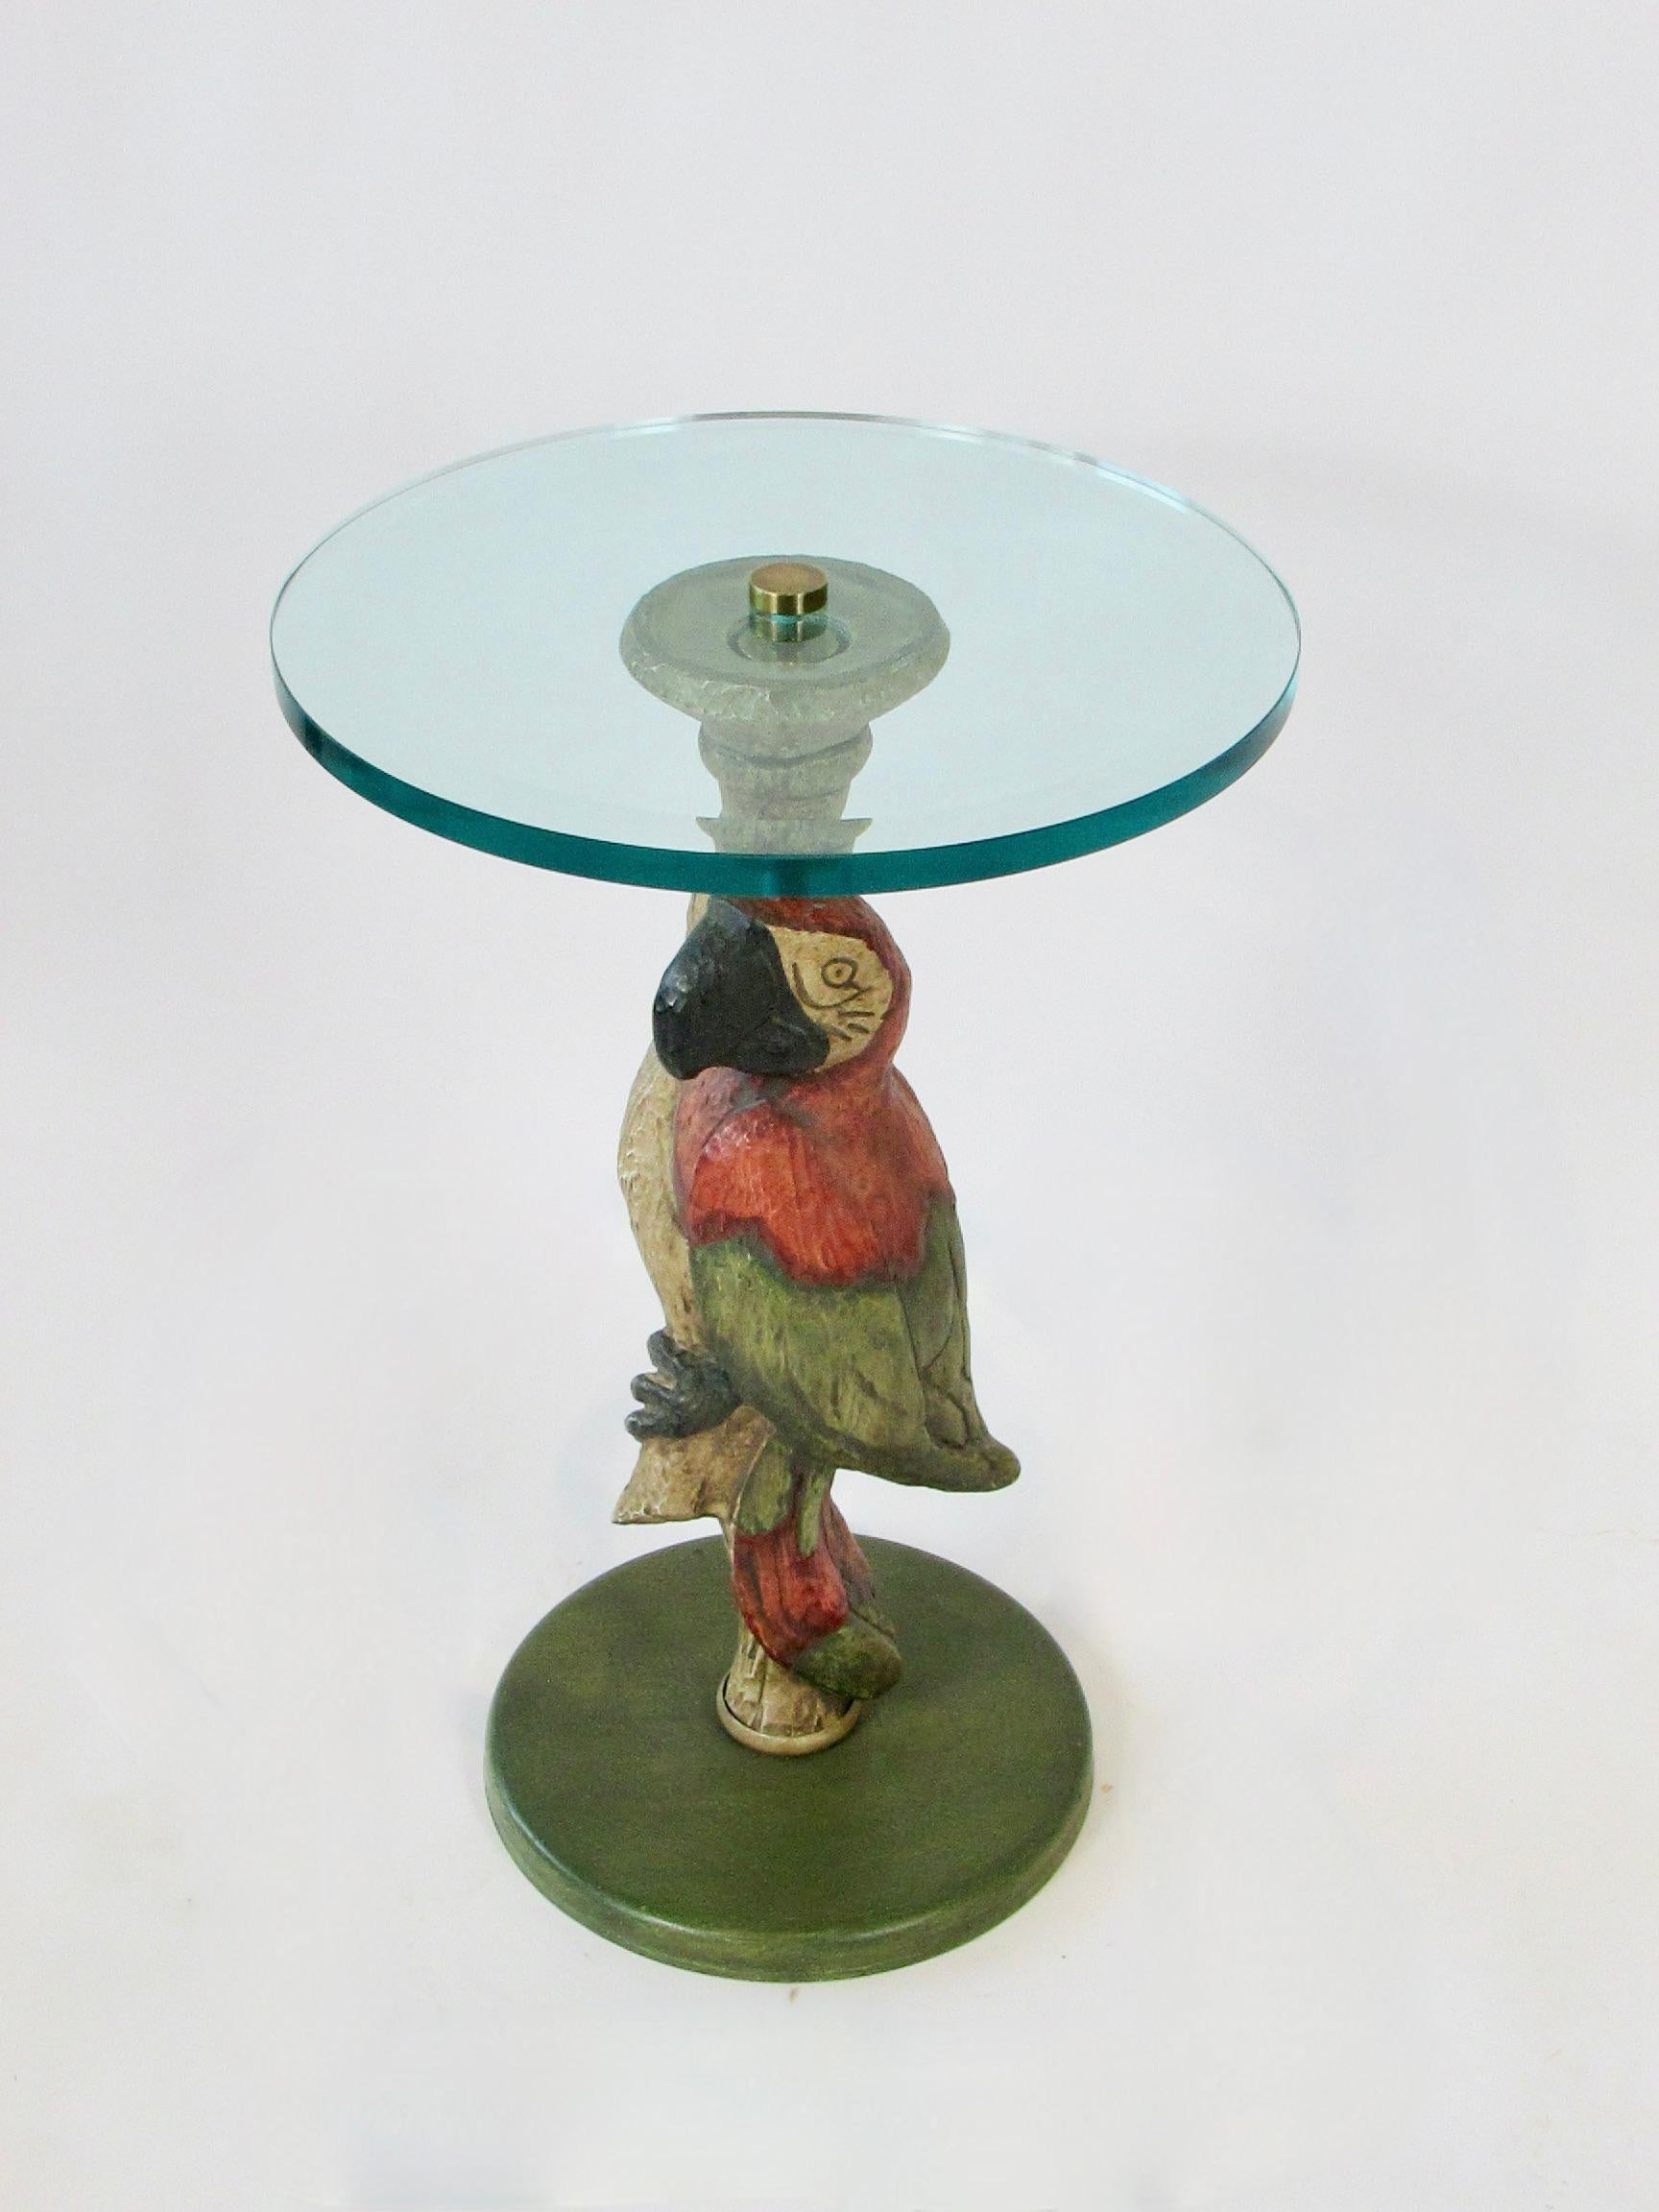 Whimsical Polly Want a Table Bevel Glass on Parrot Base Style of Maitland Smith For Sale 4